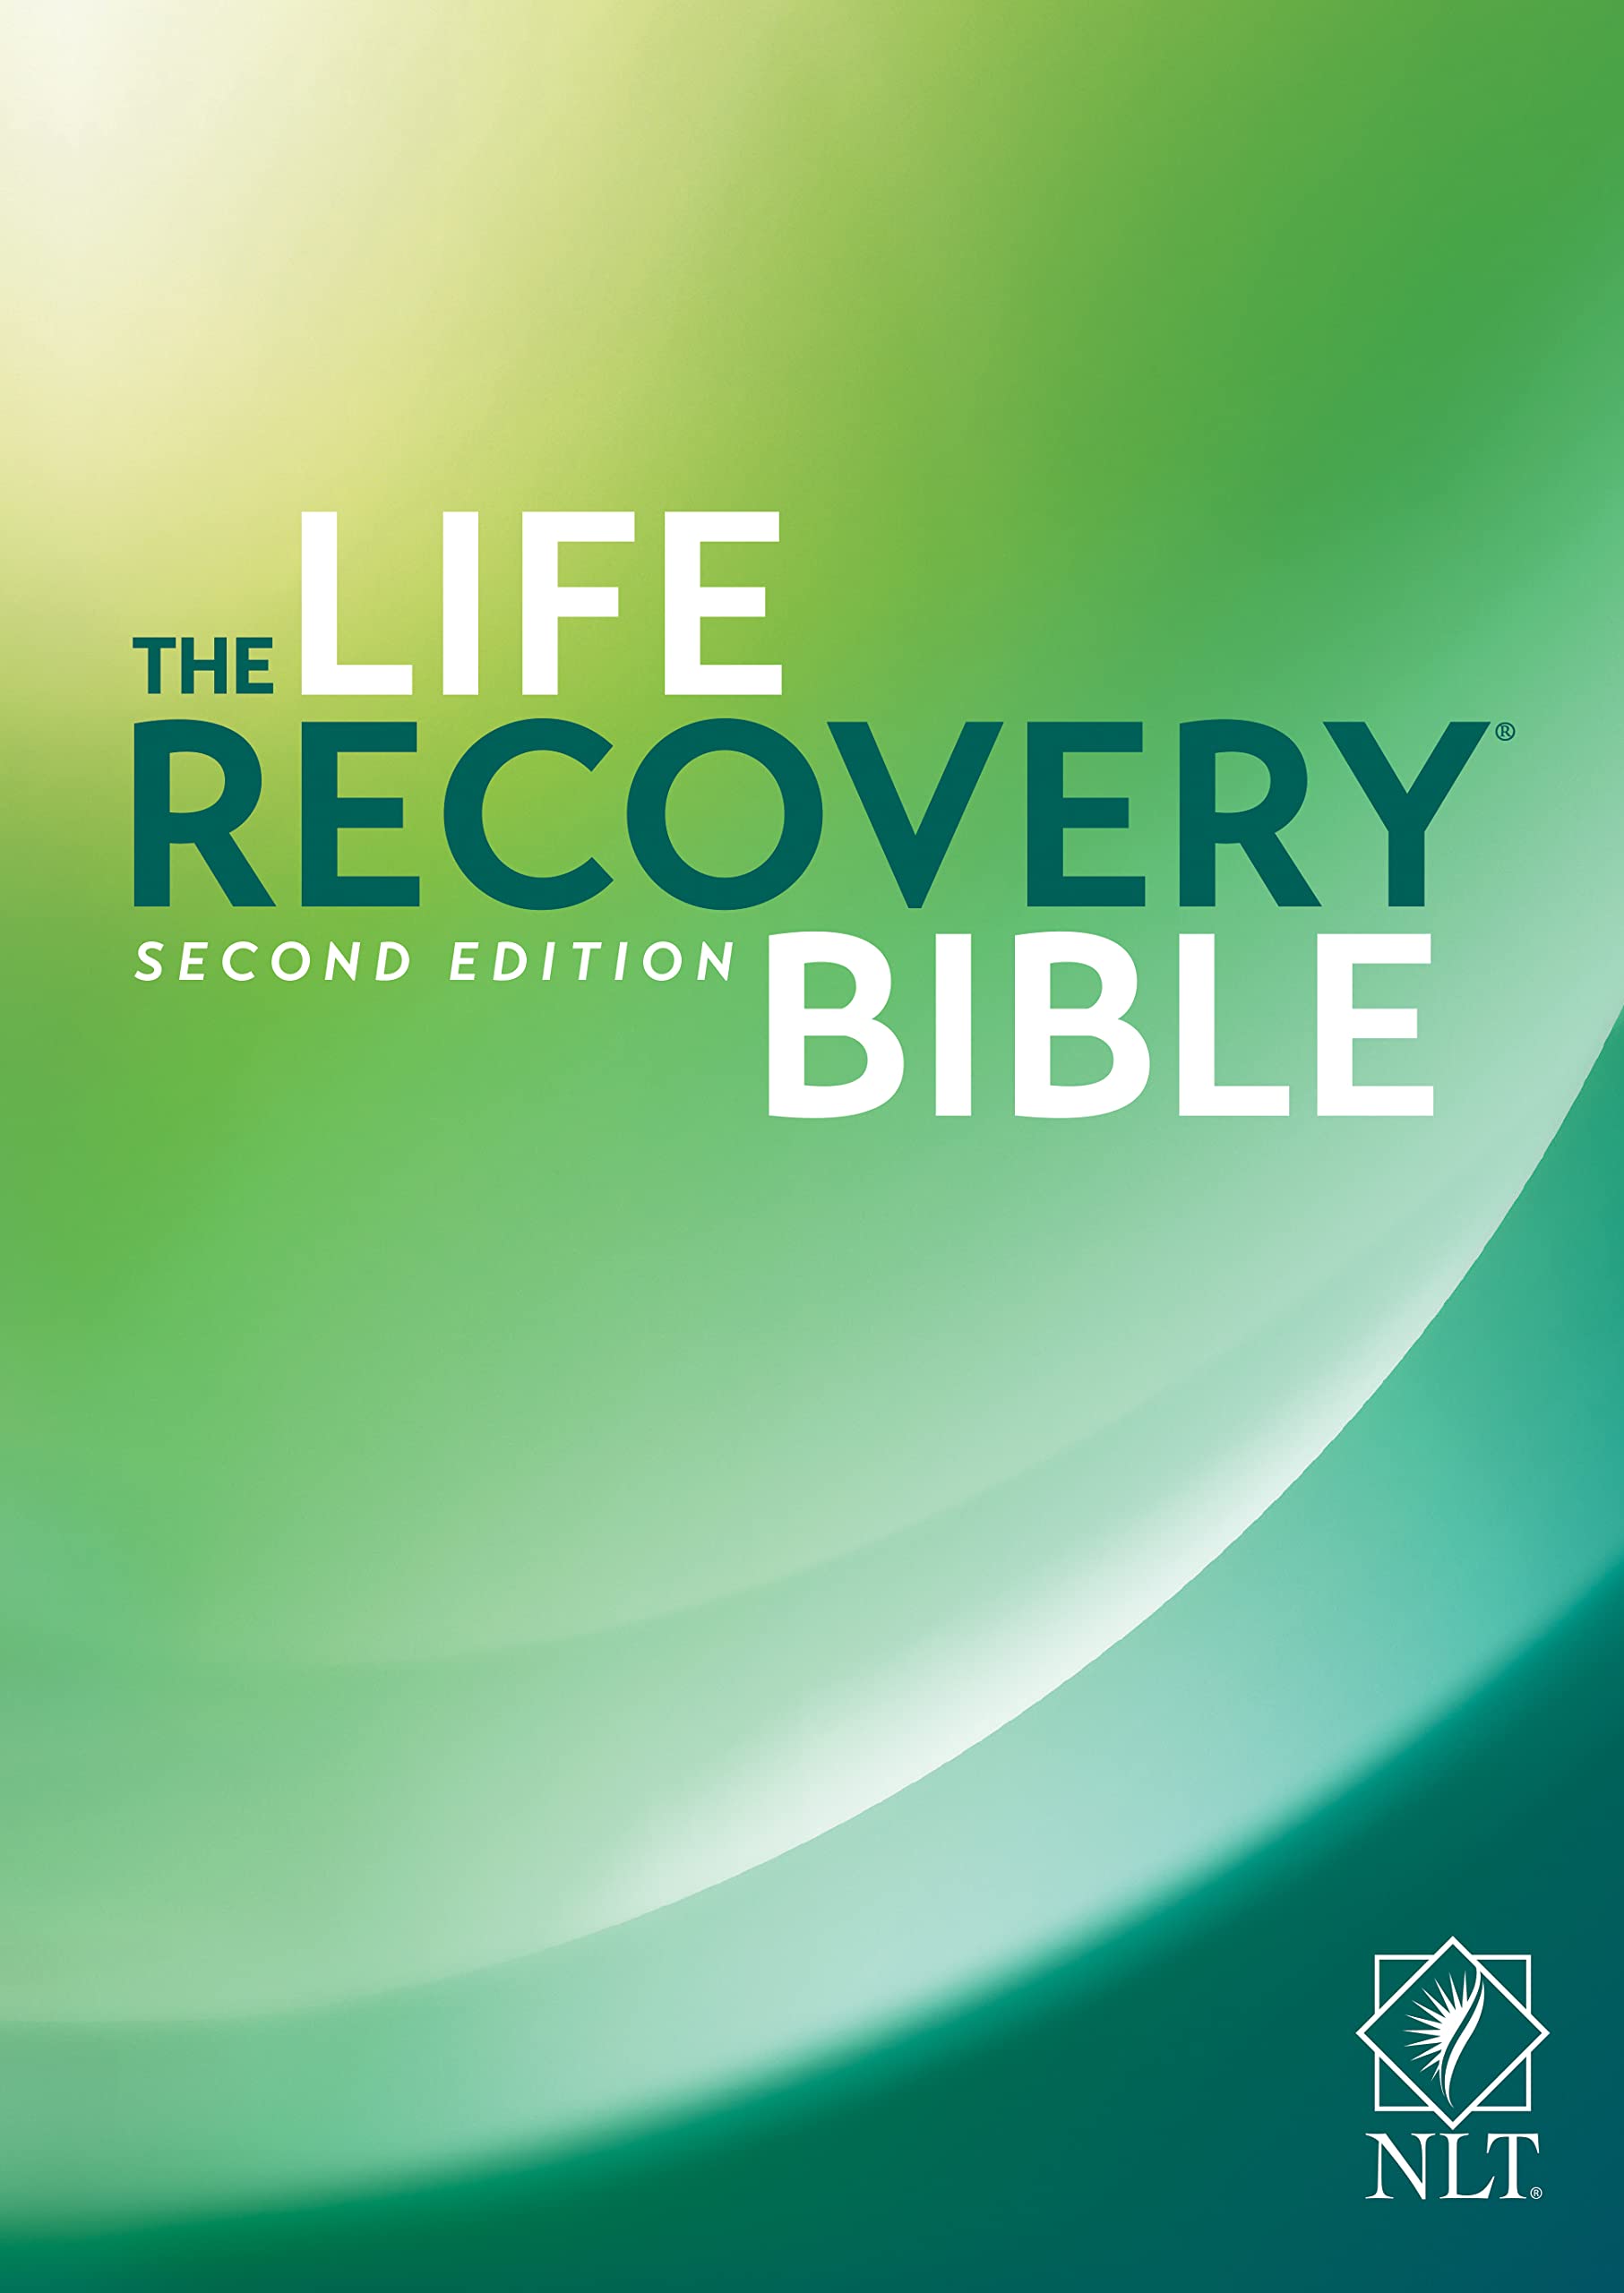 NLT Life Recovery Bible (Softcover): 2nd Edition: Addiction Bible Tied to 12 Steps of Recovery for Help with Drugs, Alcohol, Personal Struggles – With Meeting Guide